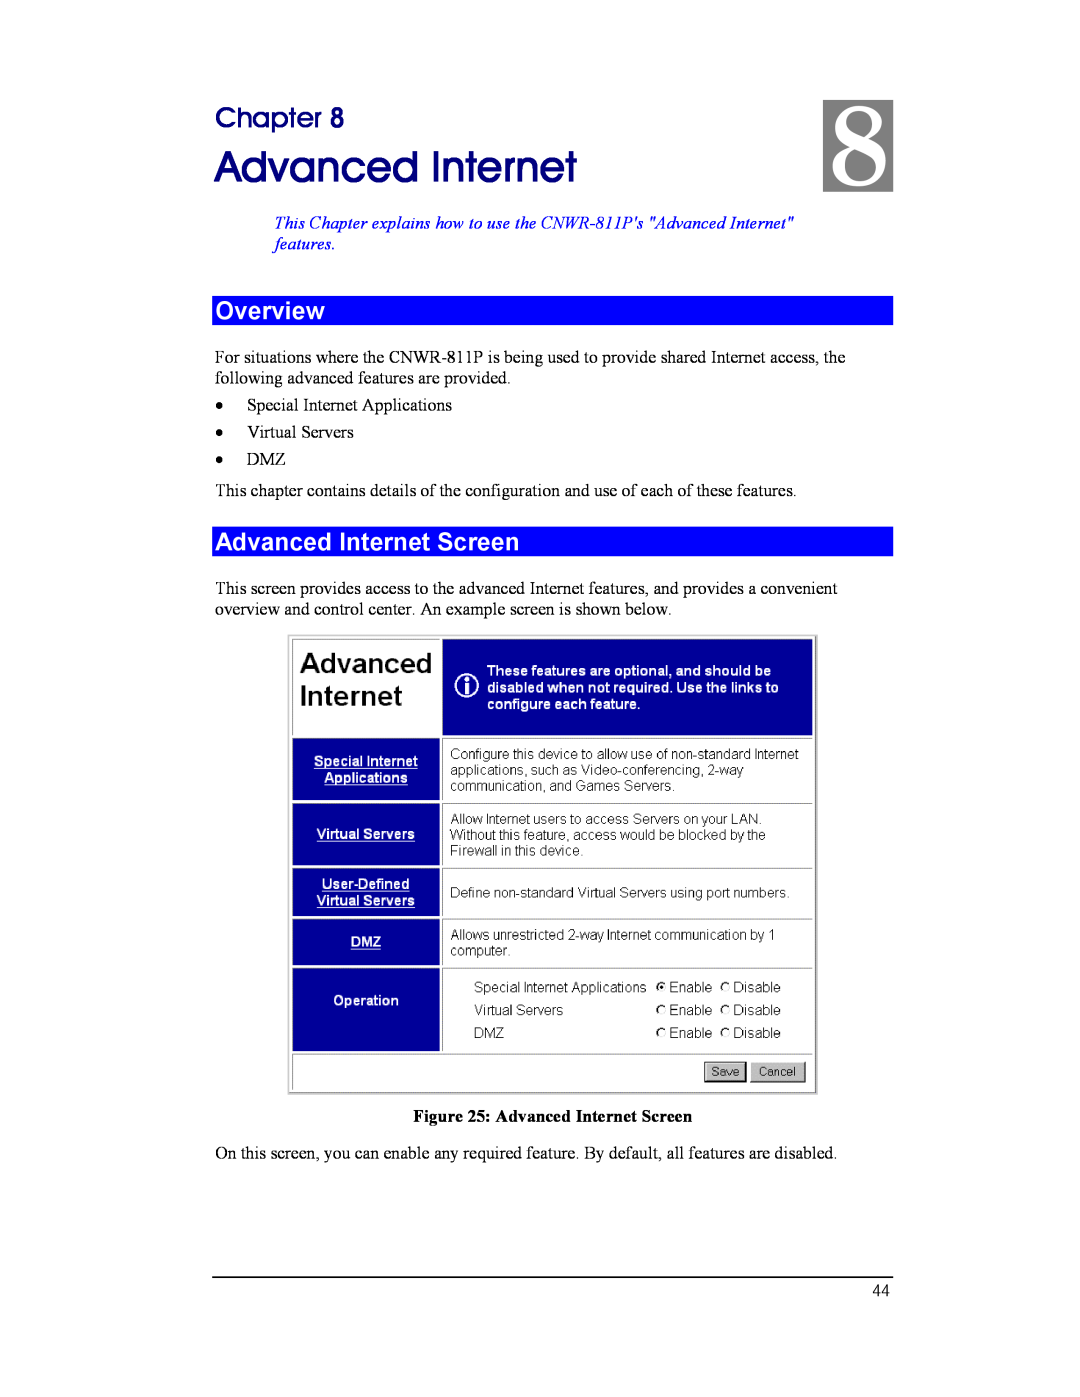 CNET CNWR-811P manual Advanced Internet Screen, Chapter, Overview 